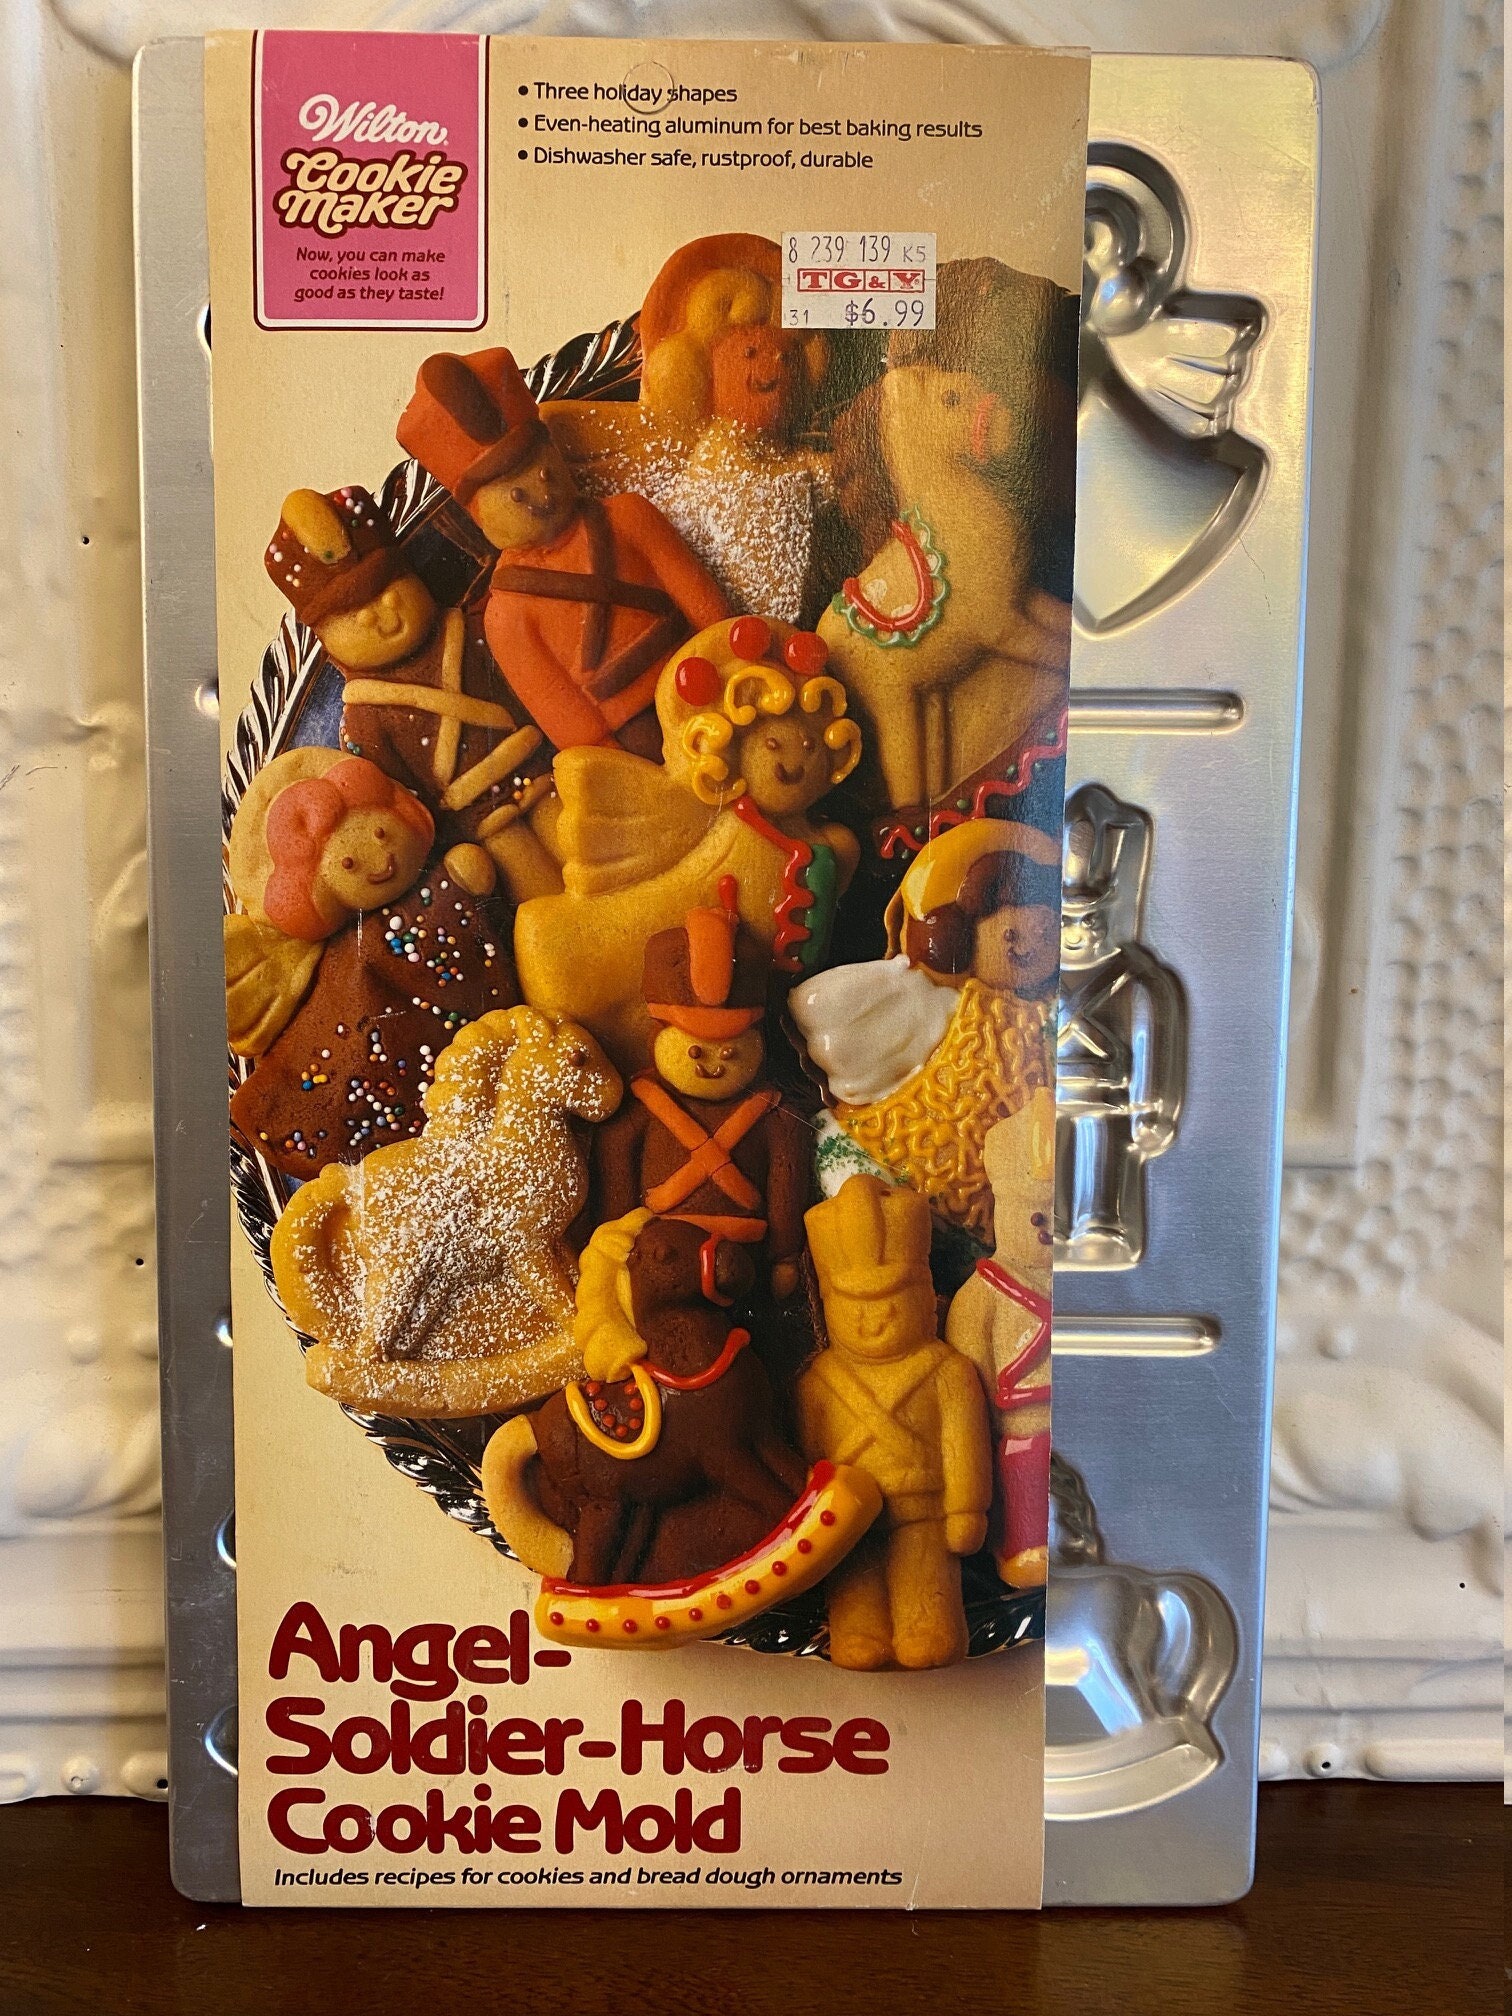 Wilton Gingerbread House Nonstick Pan Cookie Cake Mold 12x11 Inches UNUSED